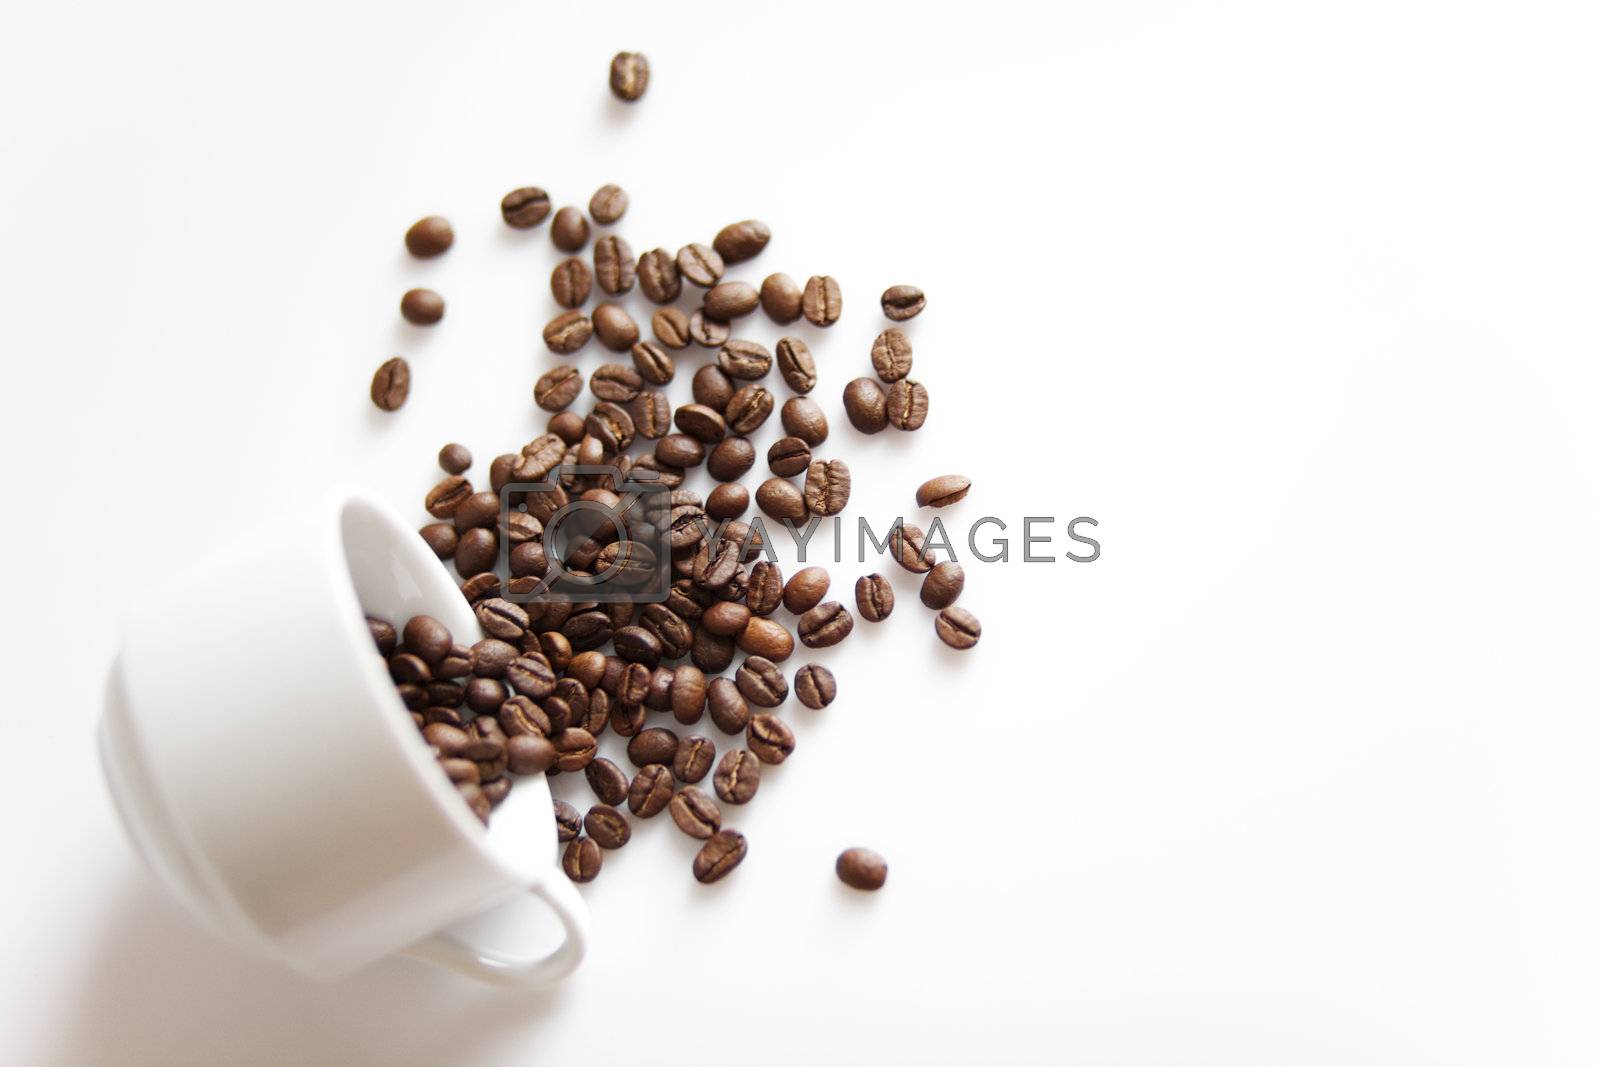 Royalty free image of Cup with sparse coffee beans by alenkasm